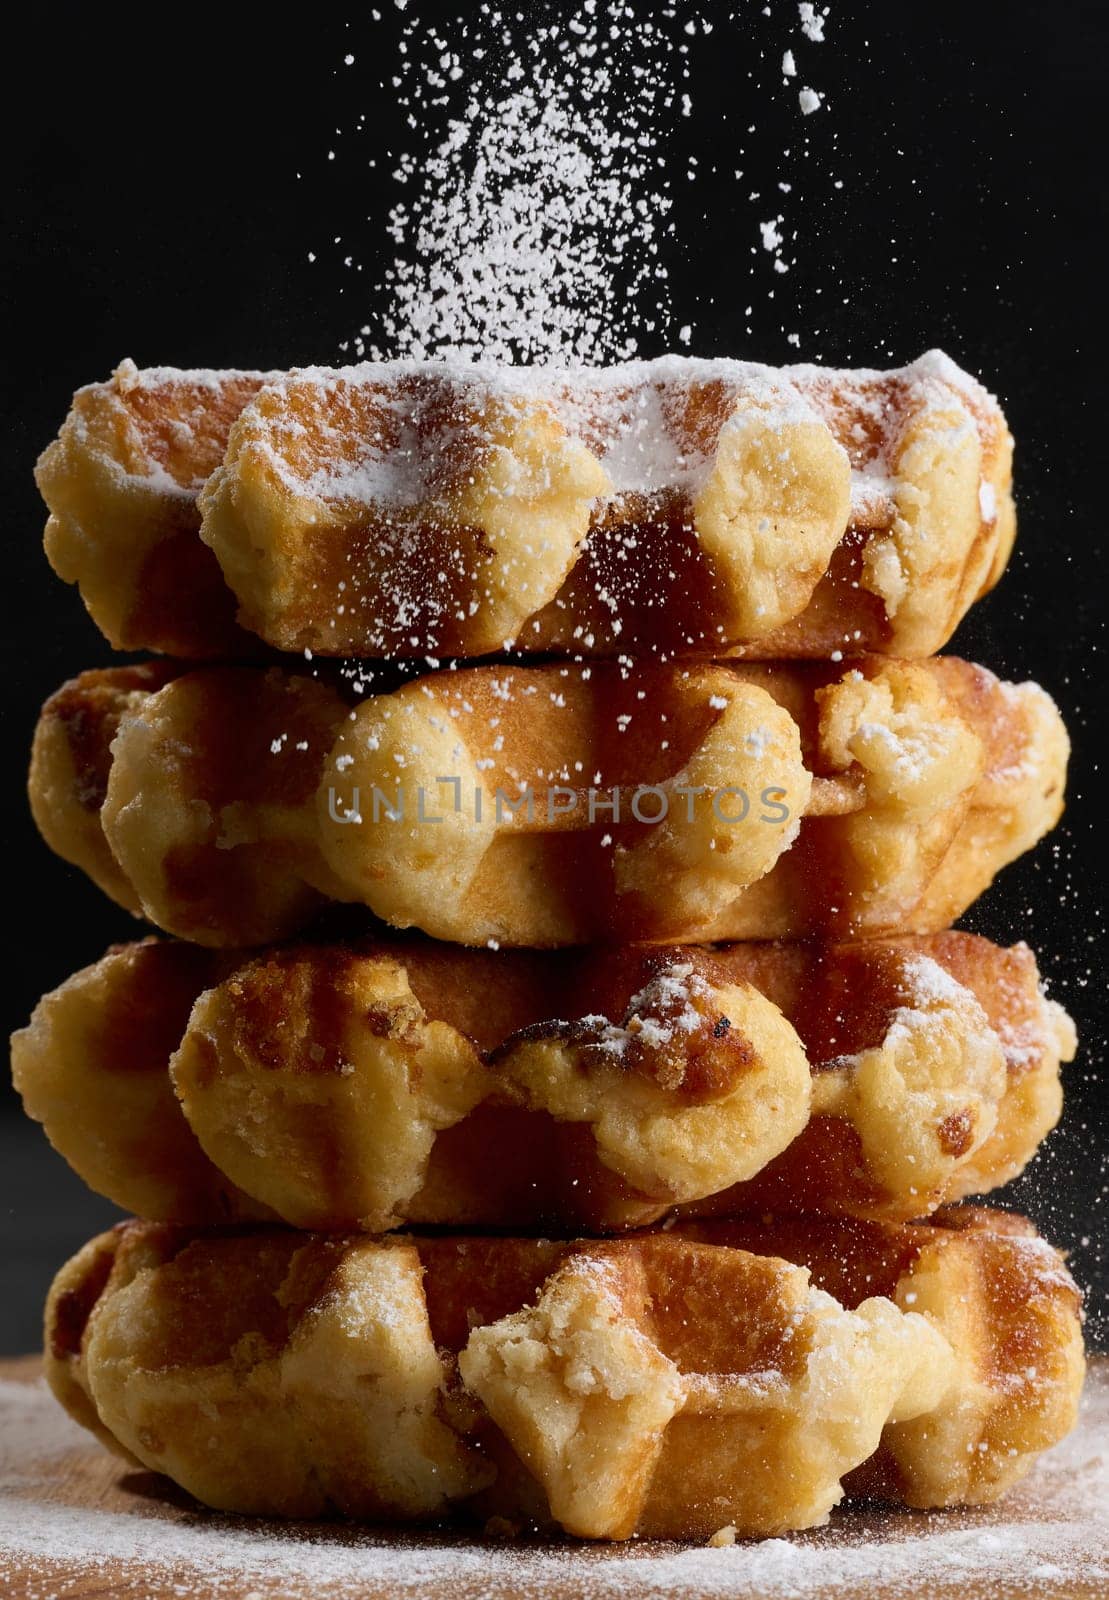 A stack of baked Belgian waffles sprinkled with powdered sugar